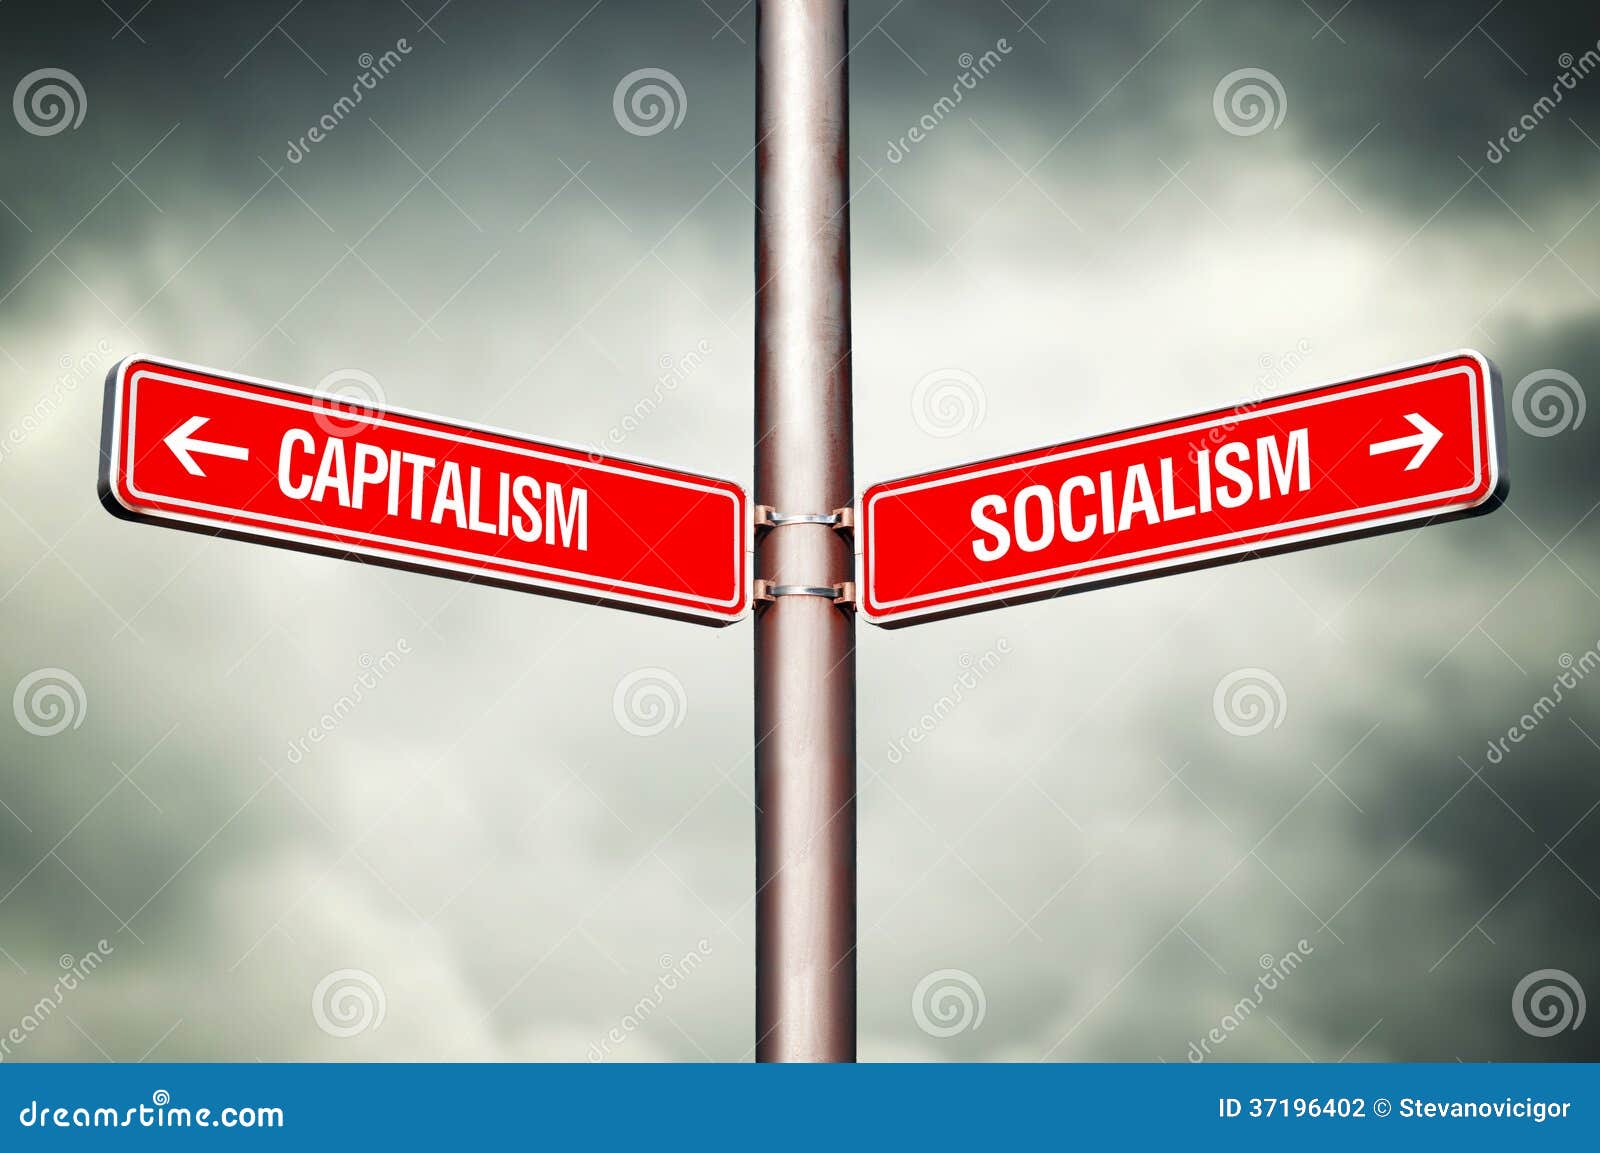 capitalism or socialism concept